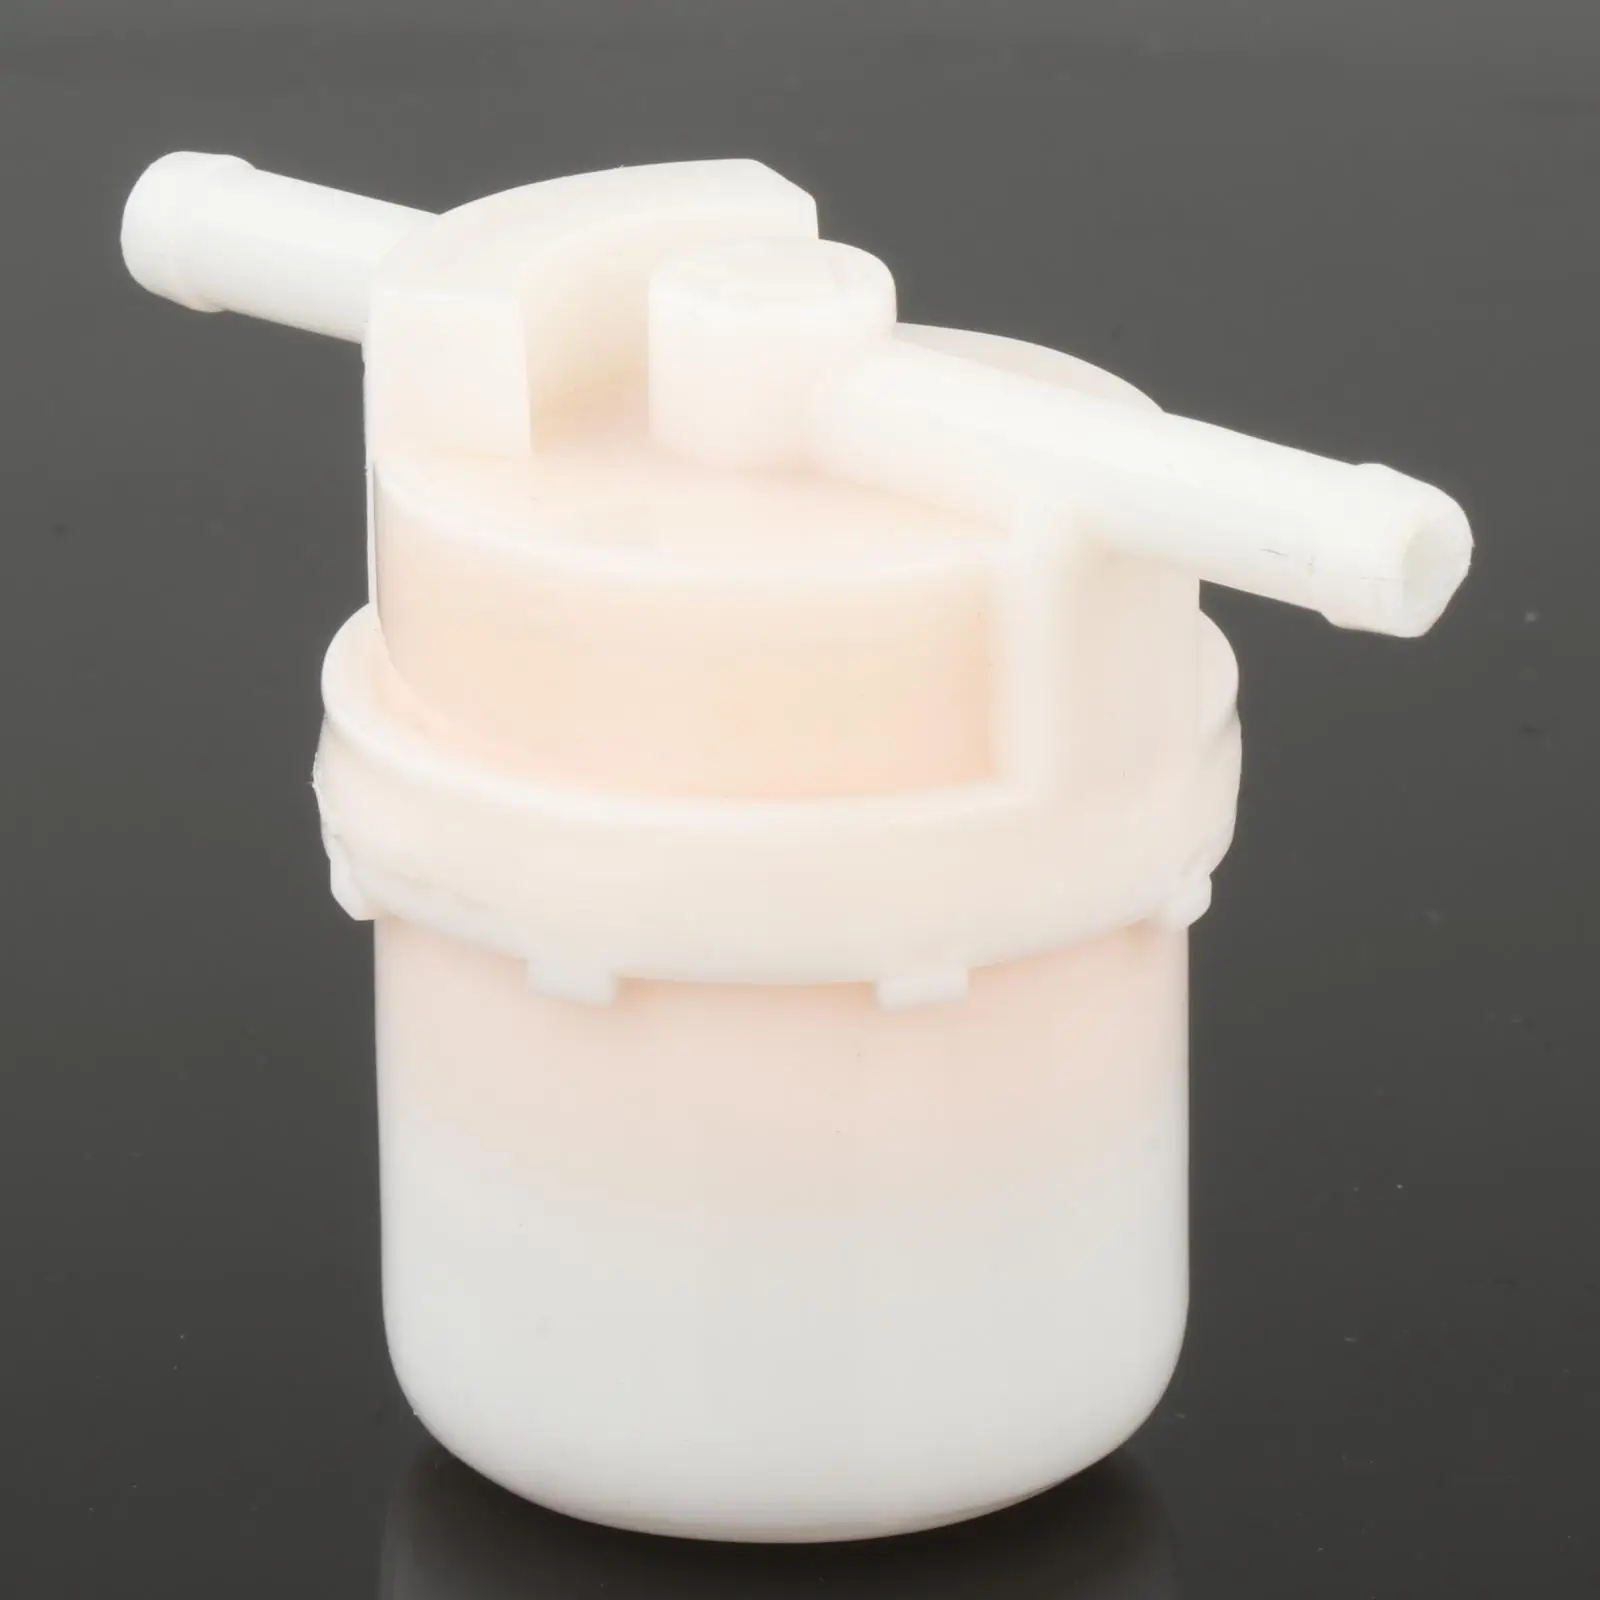 Fuel Filter 16900-Sa5-004 Fit for Honda Outboard Parts 35, 40, 45, 50, 75, 90 Durable